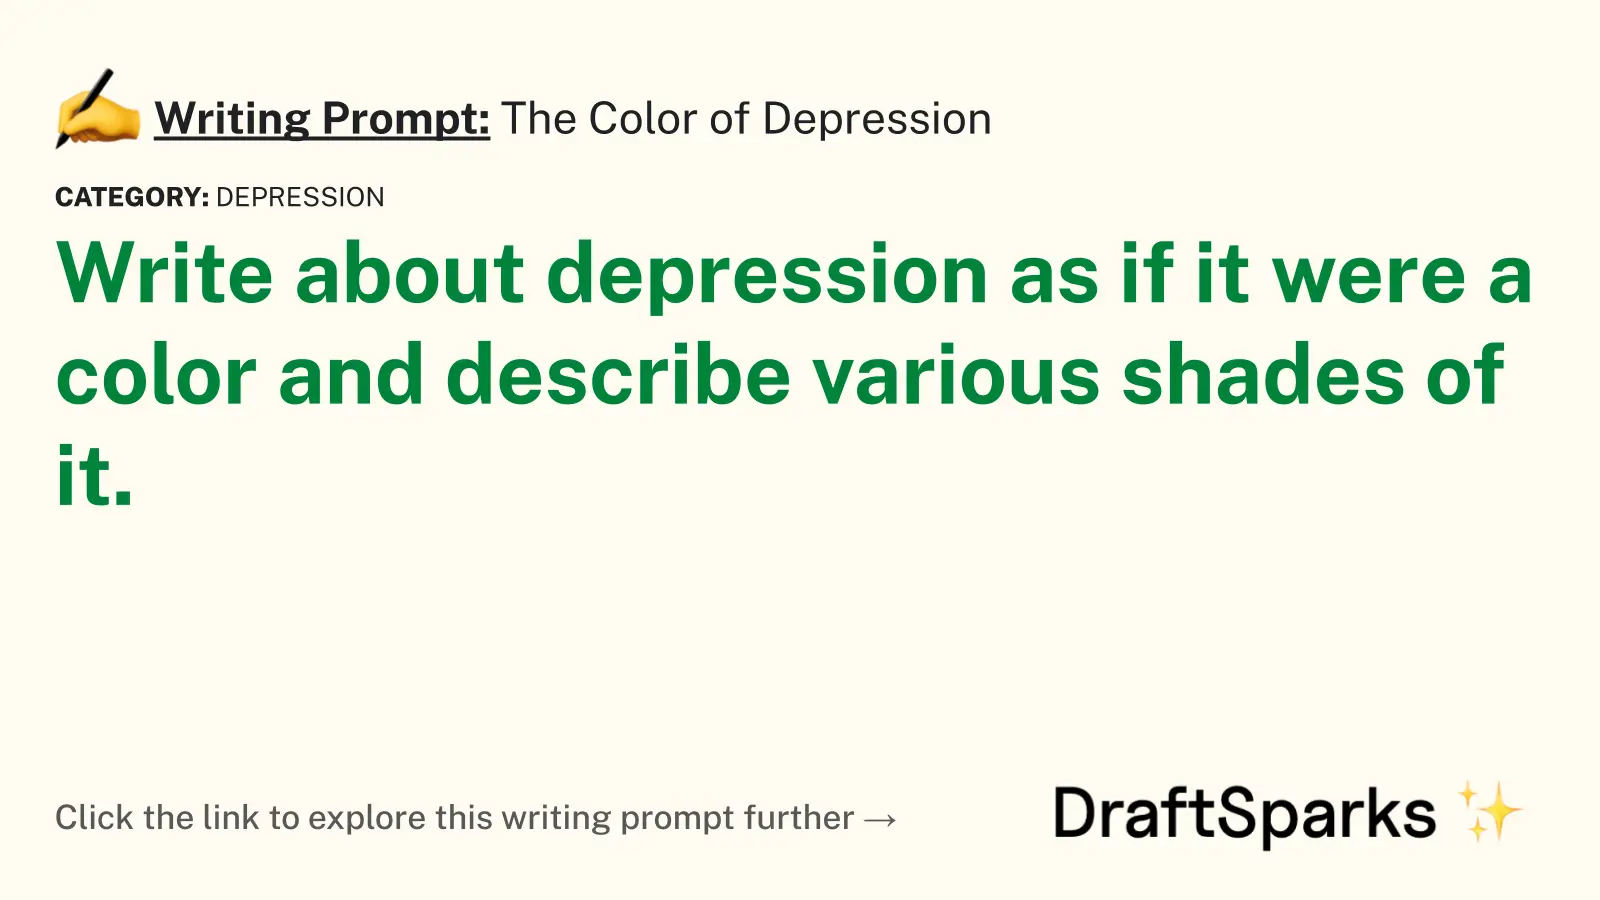 The Color of Depression